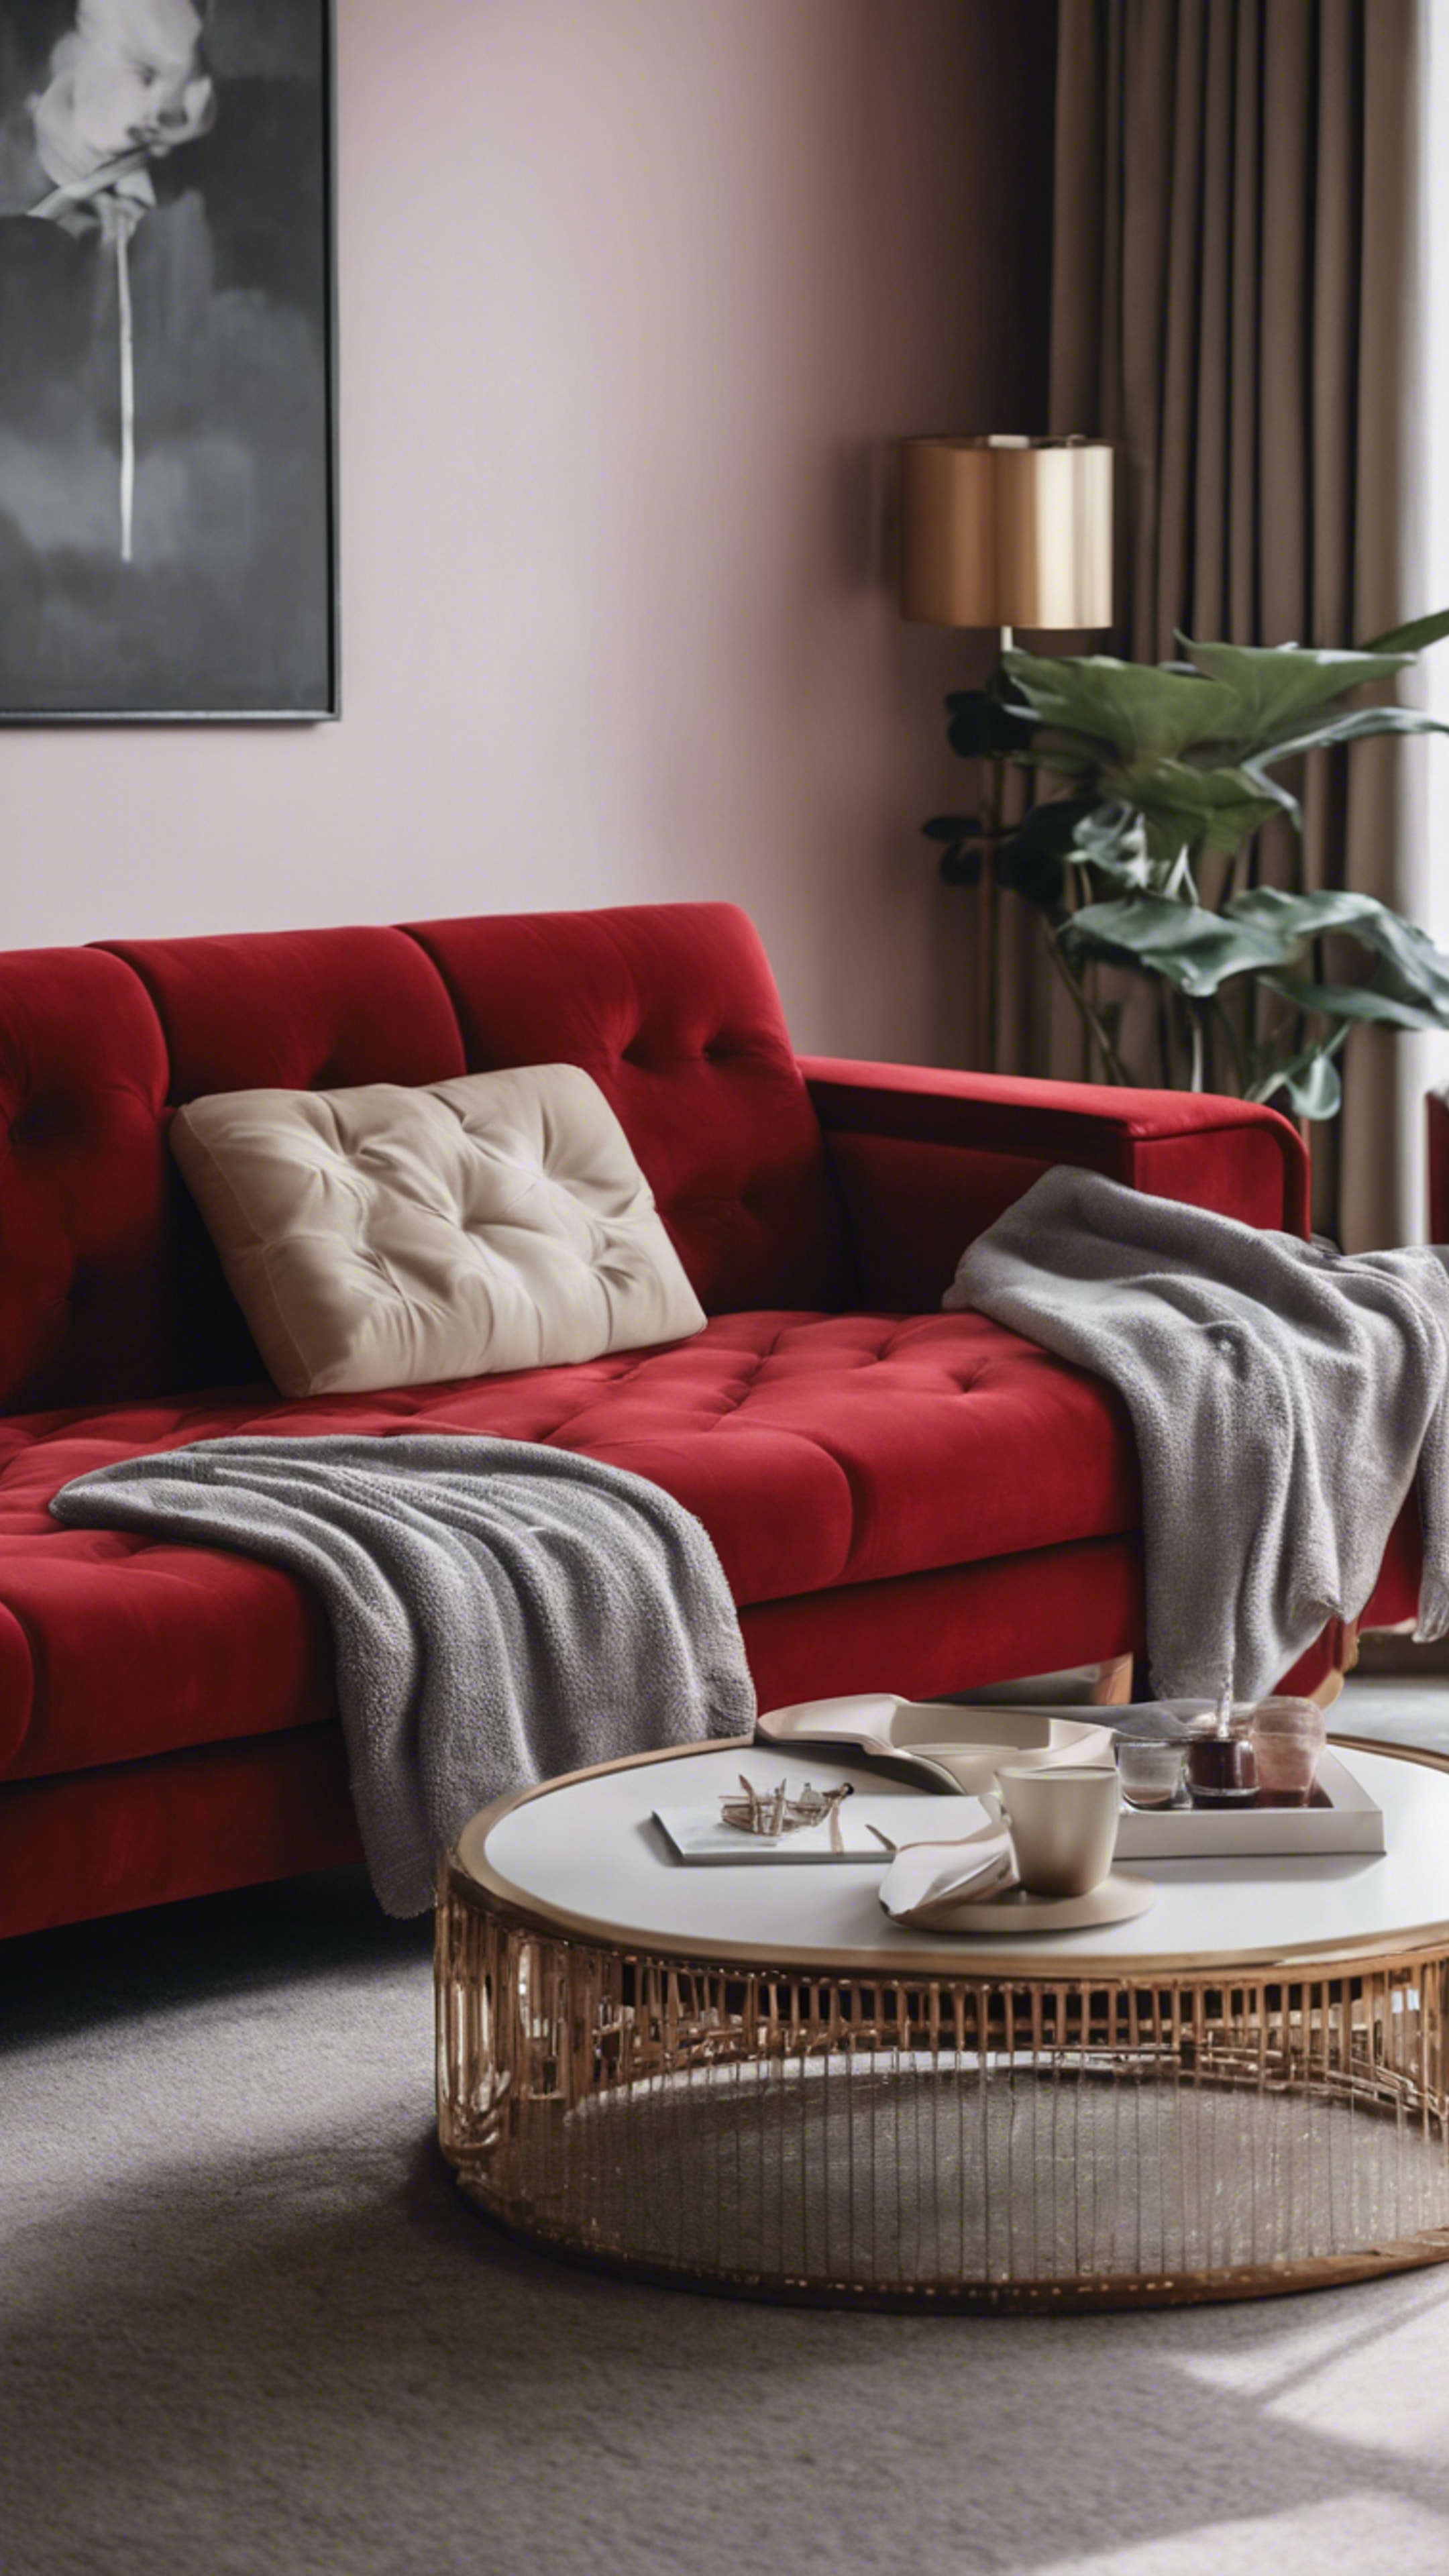 A luxurious red velvet sofa in a minimalistic modern living room, its color standing out in an otherwise neutral scene. Wallpaper[9f5c54c2b7d04d069b86]